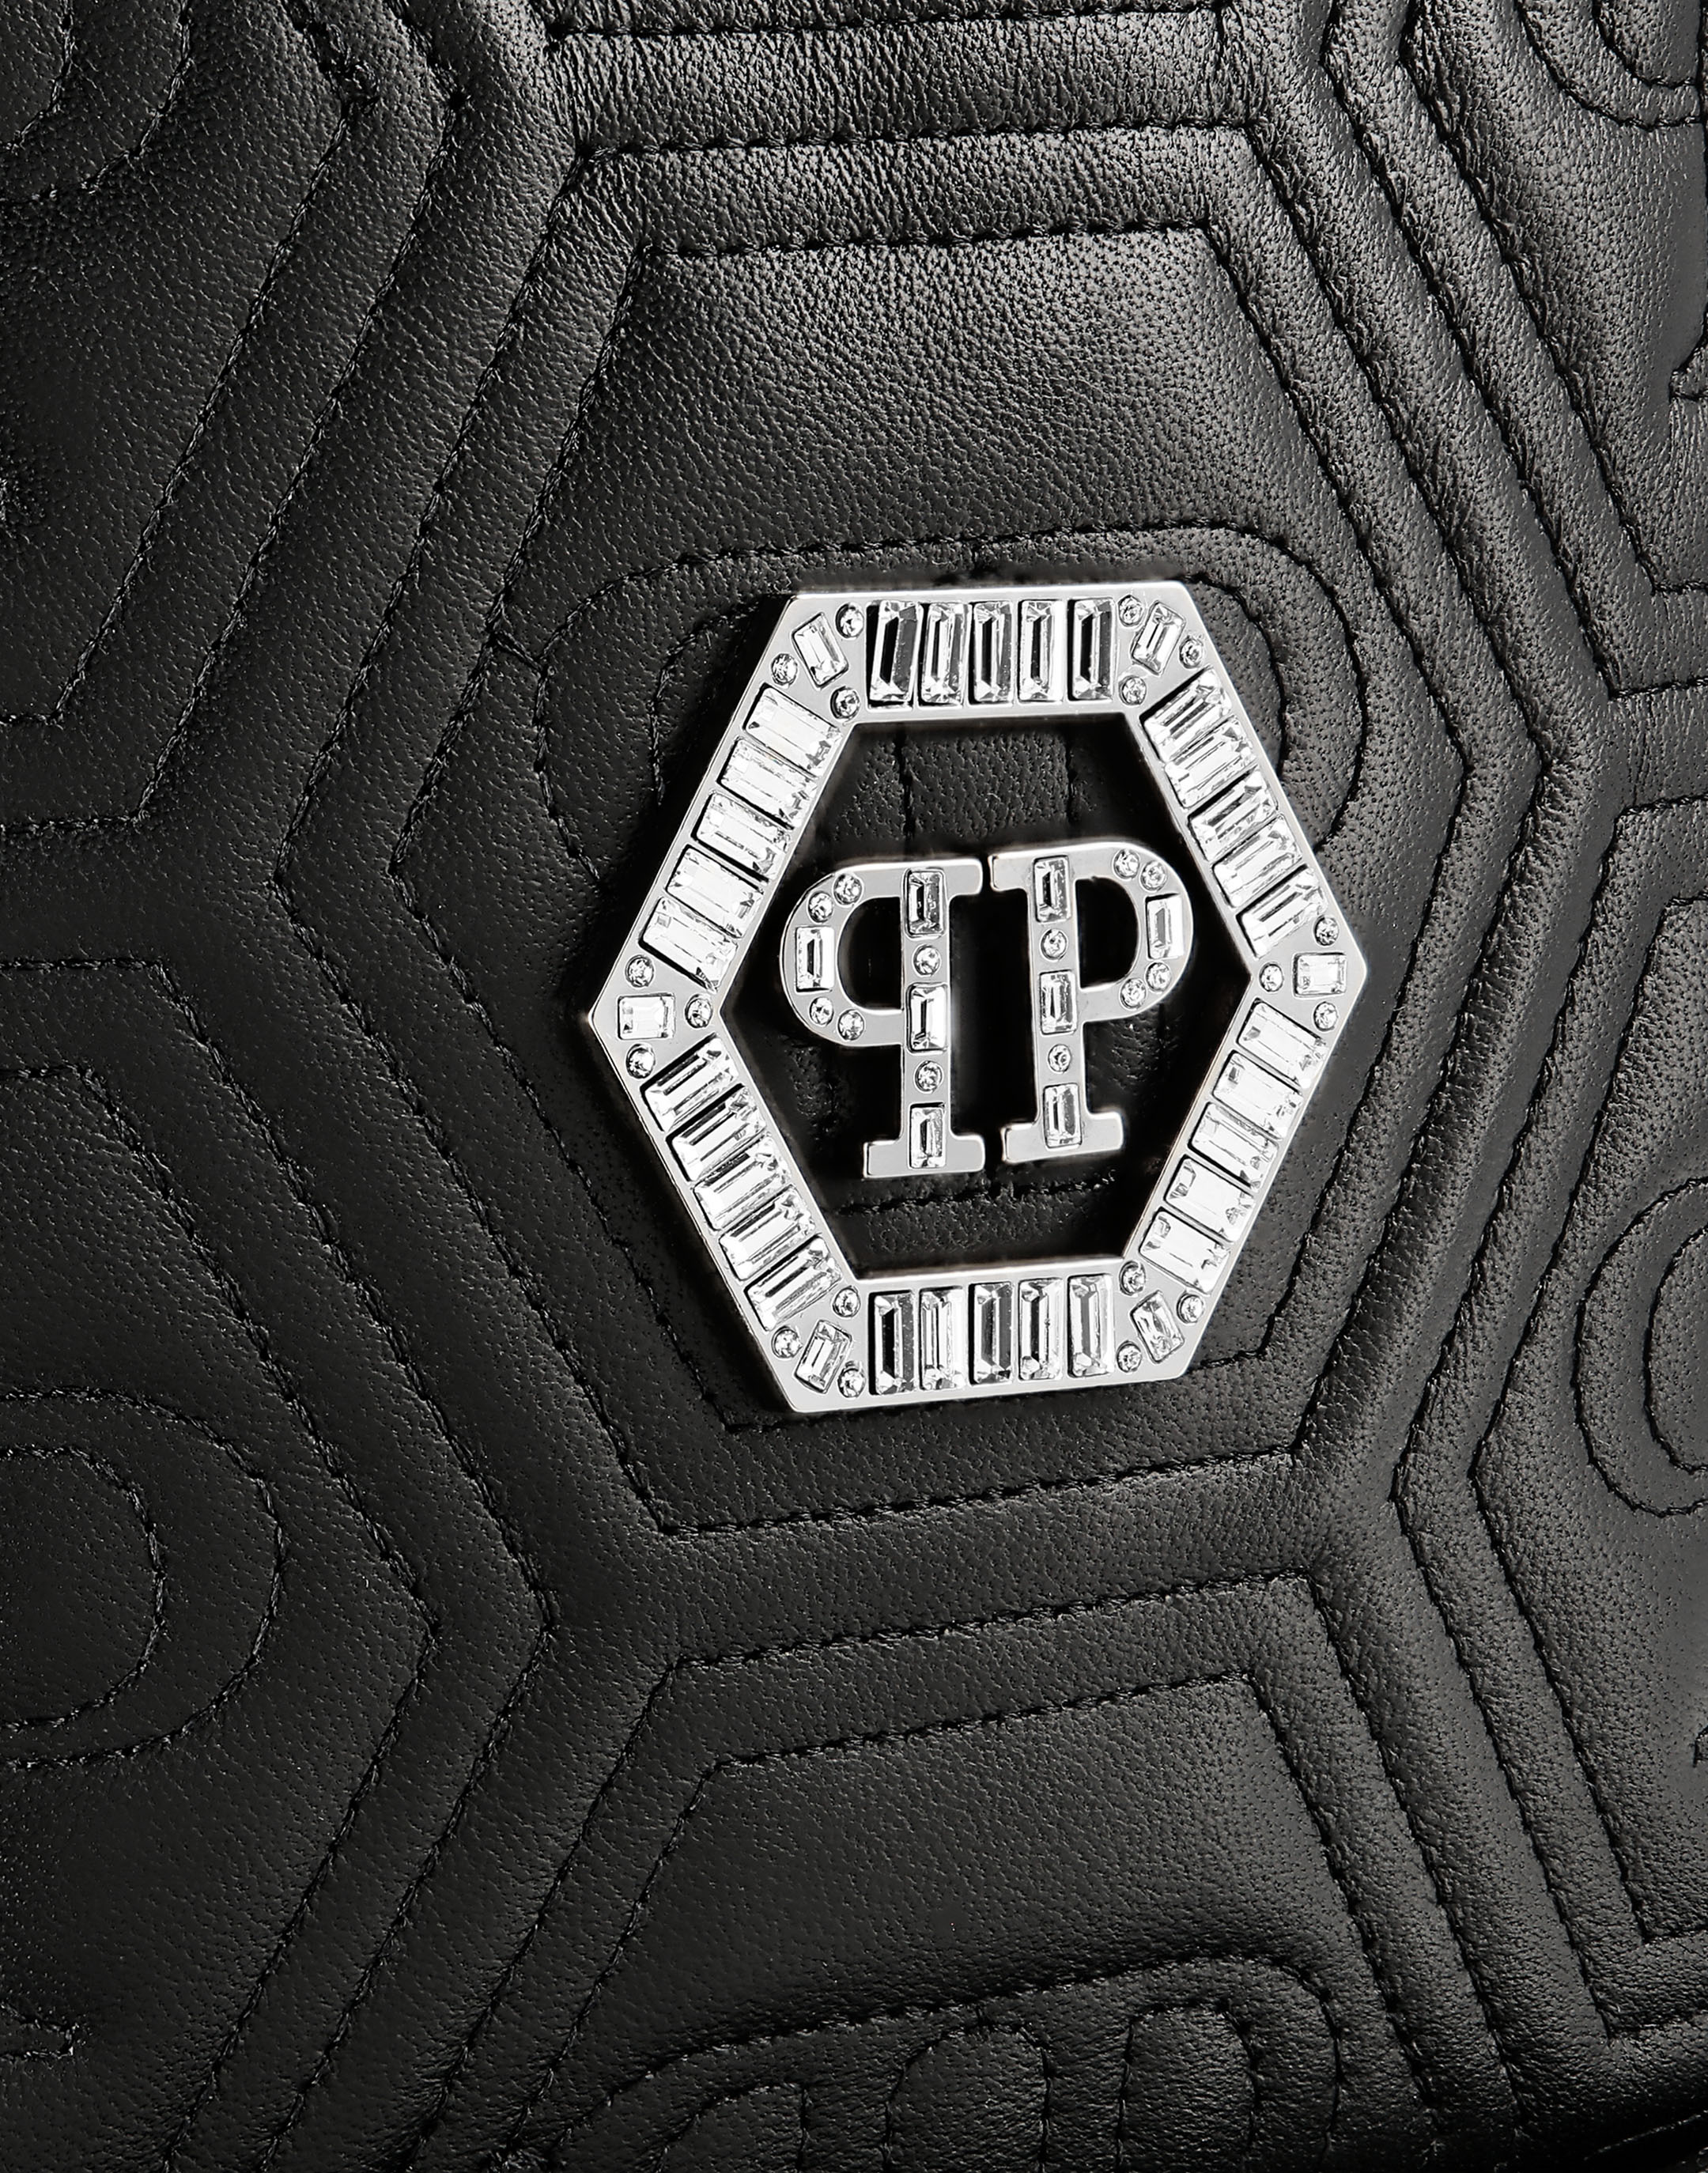 Backpack Crystal | Philipp Plein Outlet